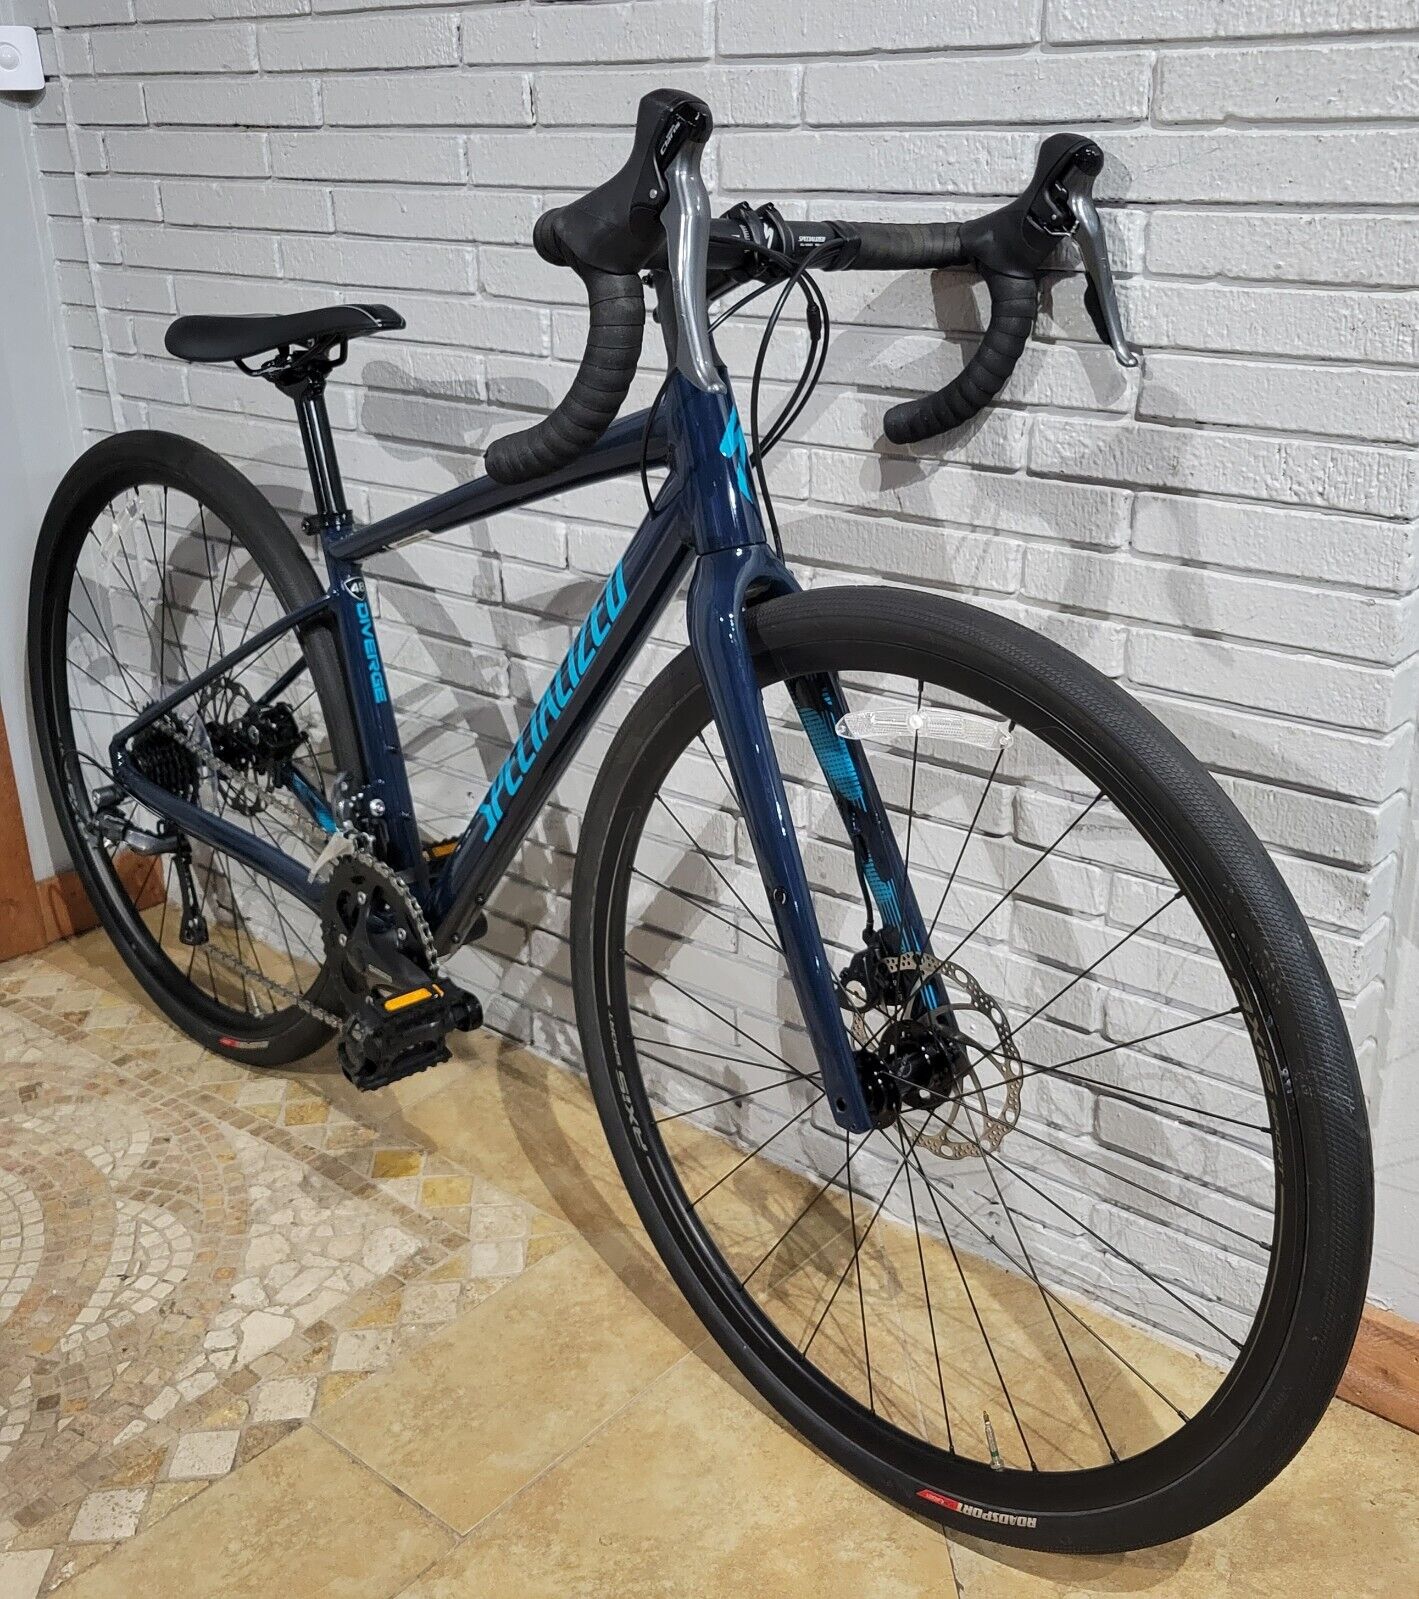 2020 Specialized Diverge e5 (Size 48cm Extra Small)